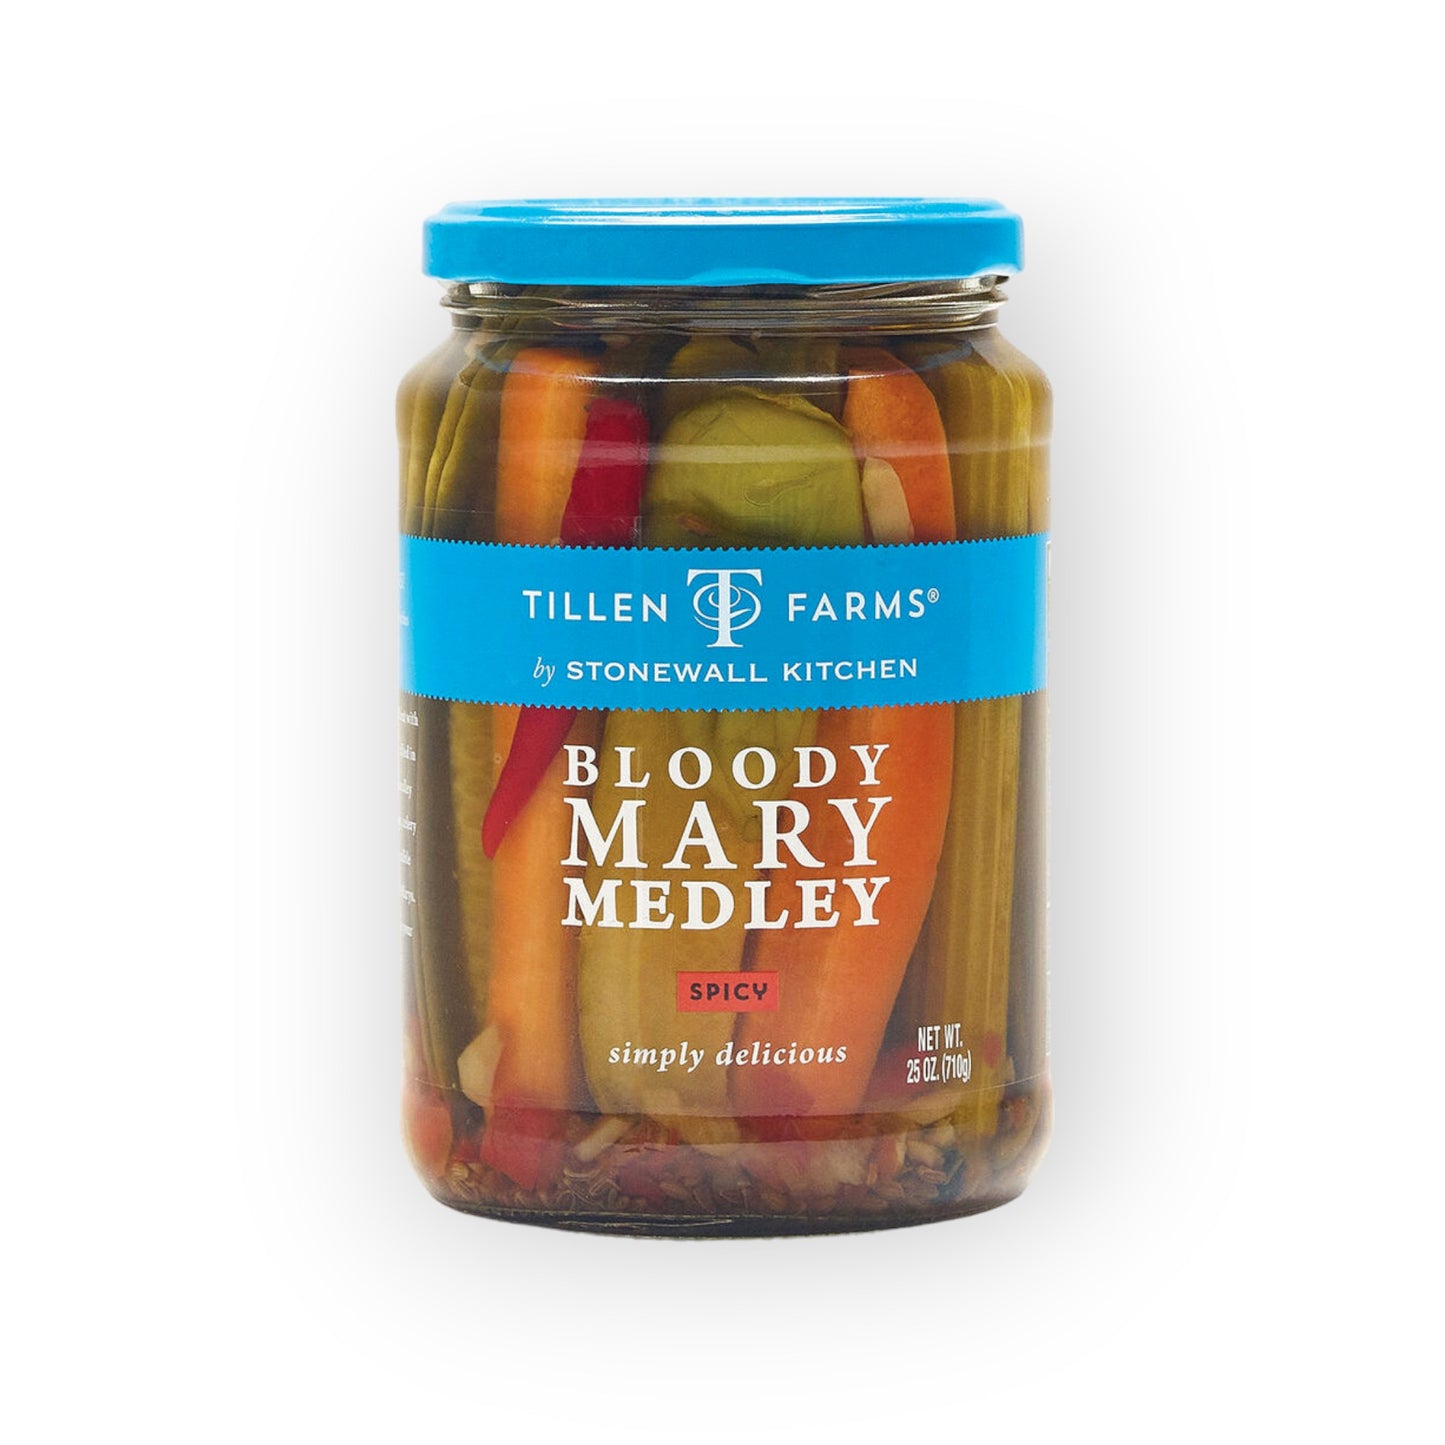 Tillen Farms Bloody Mary Medley Spicy